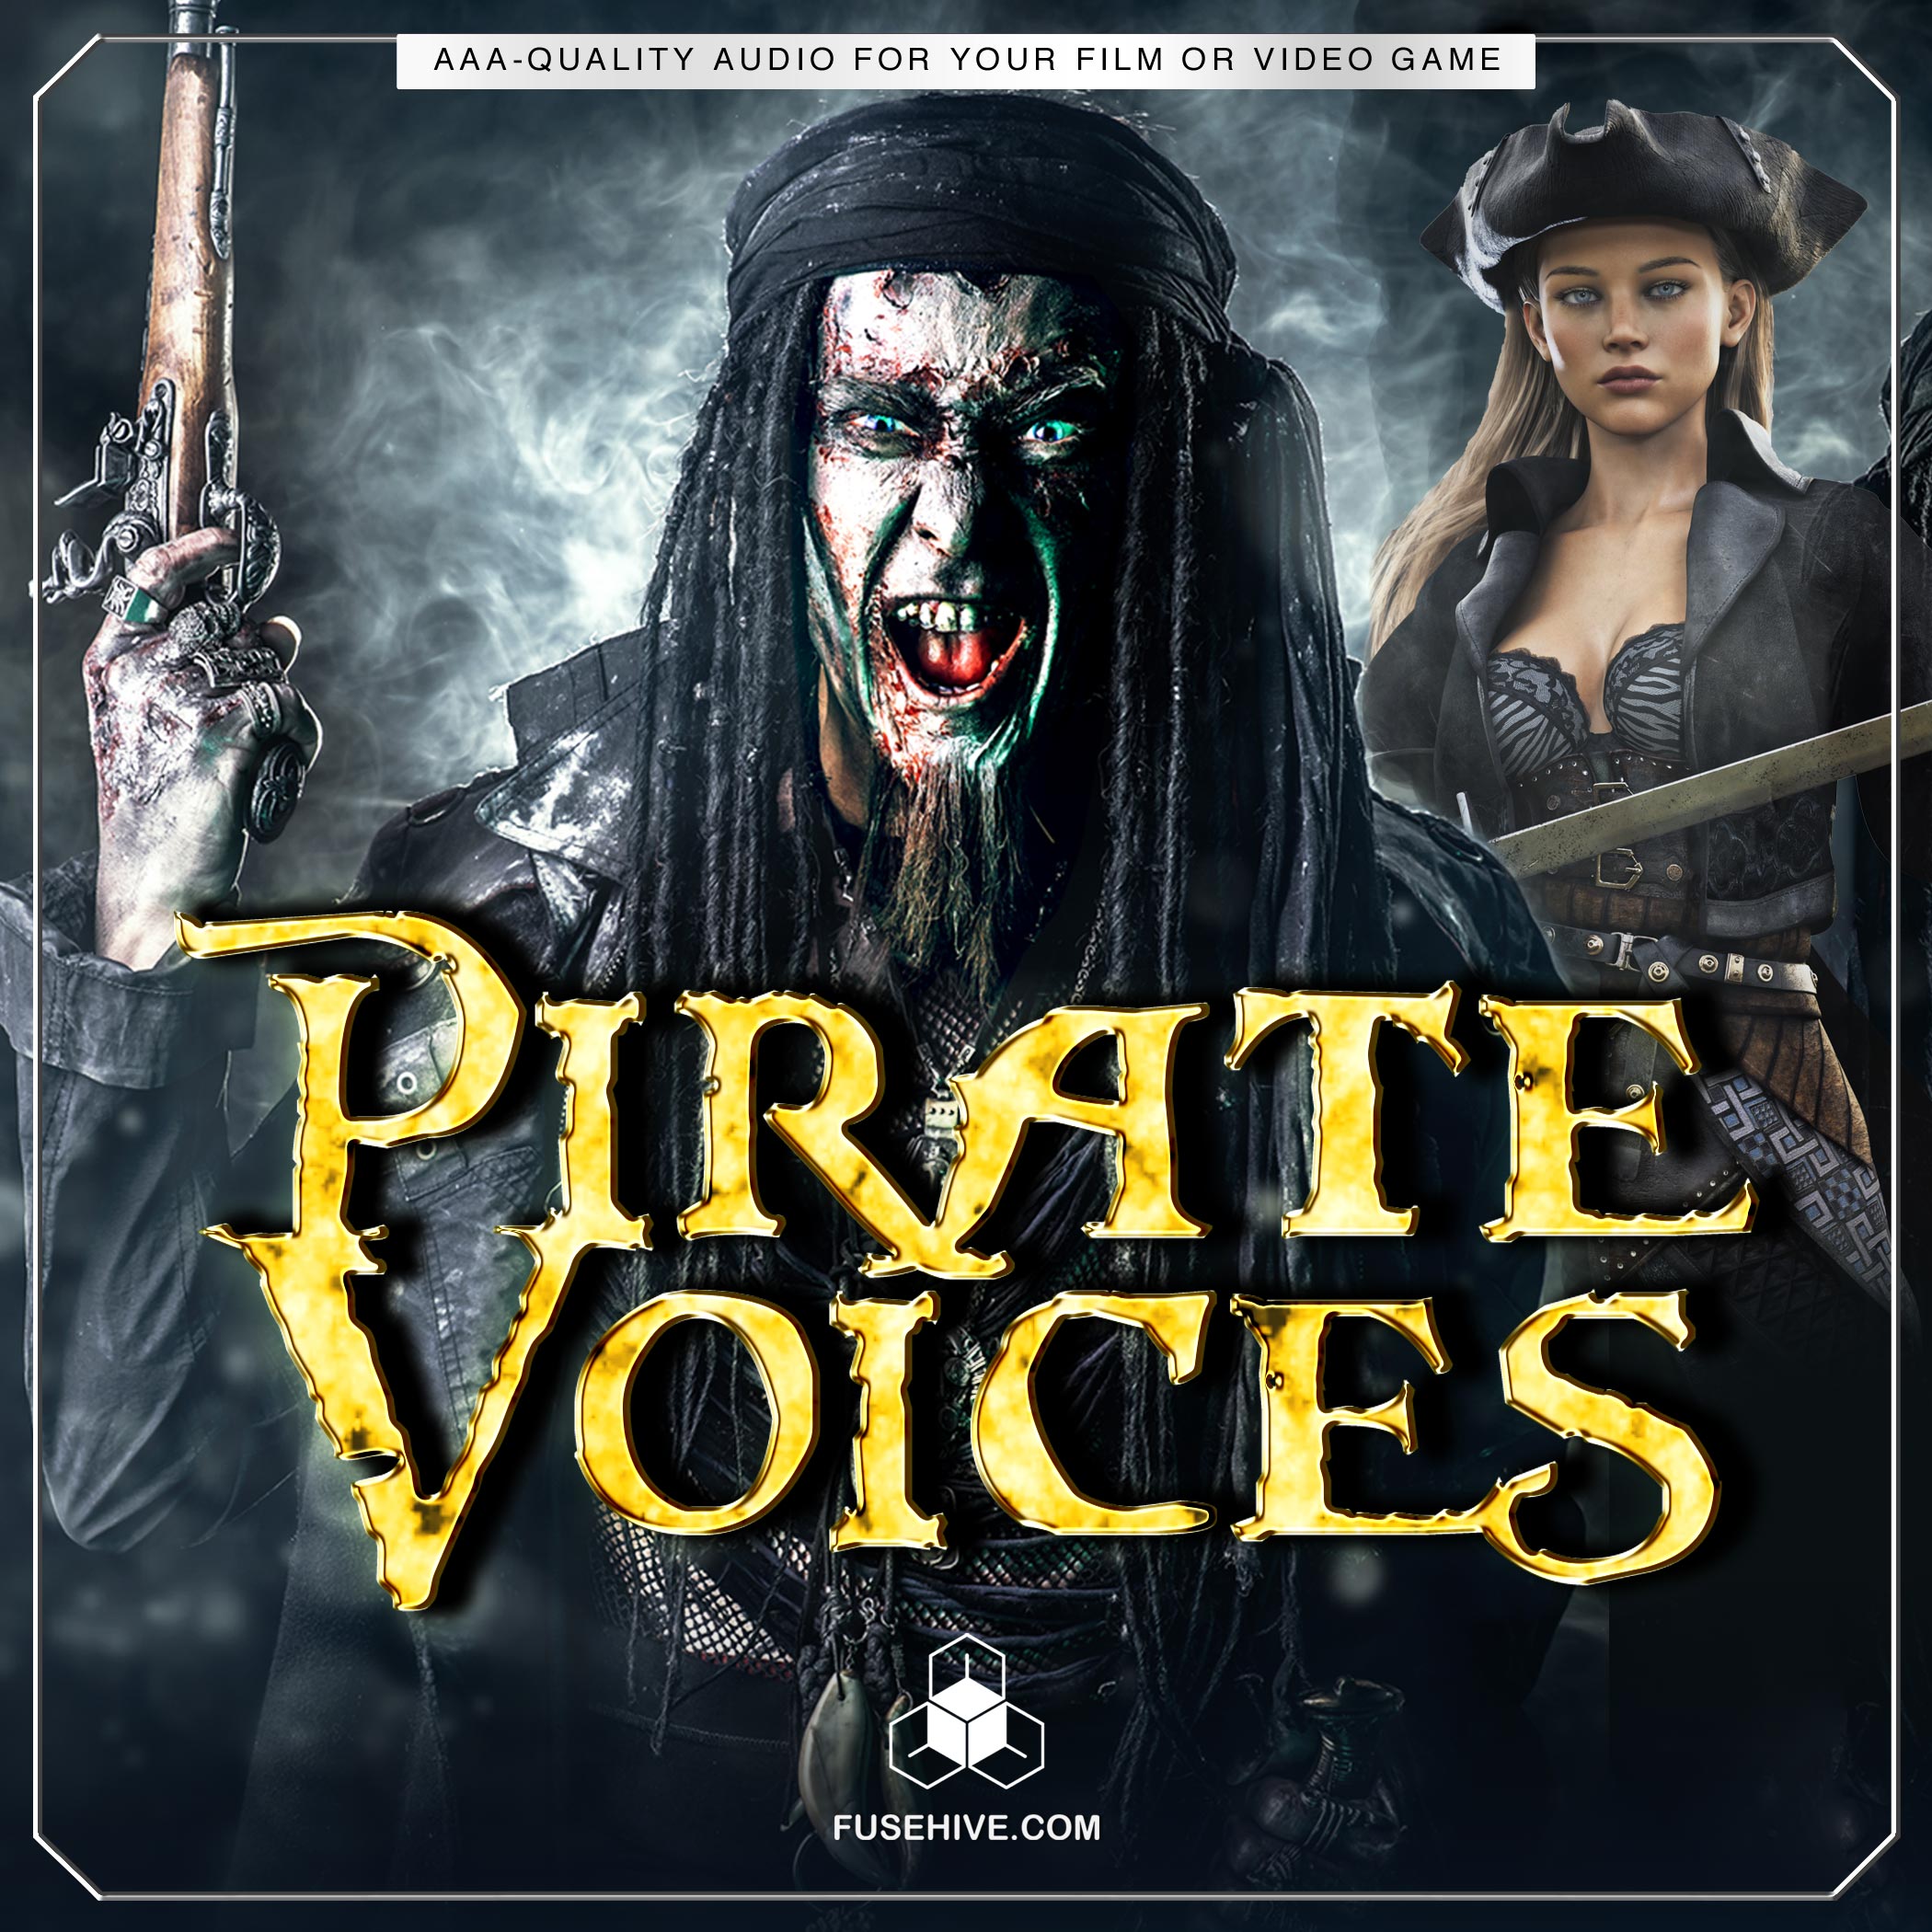 Sound Effects Library, Sound Effects, Sound Effects Download, Royalty Free Sound Effects,Pirate Voice Sound Effects,Pirate Sound Effects